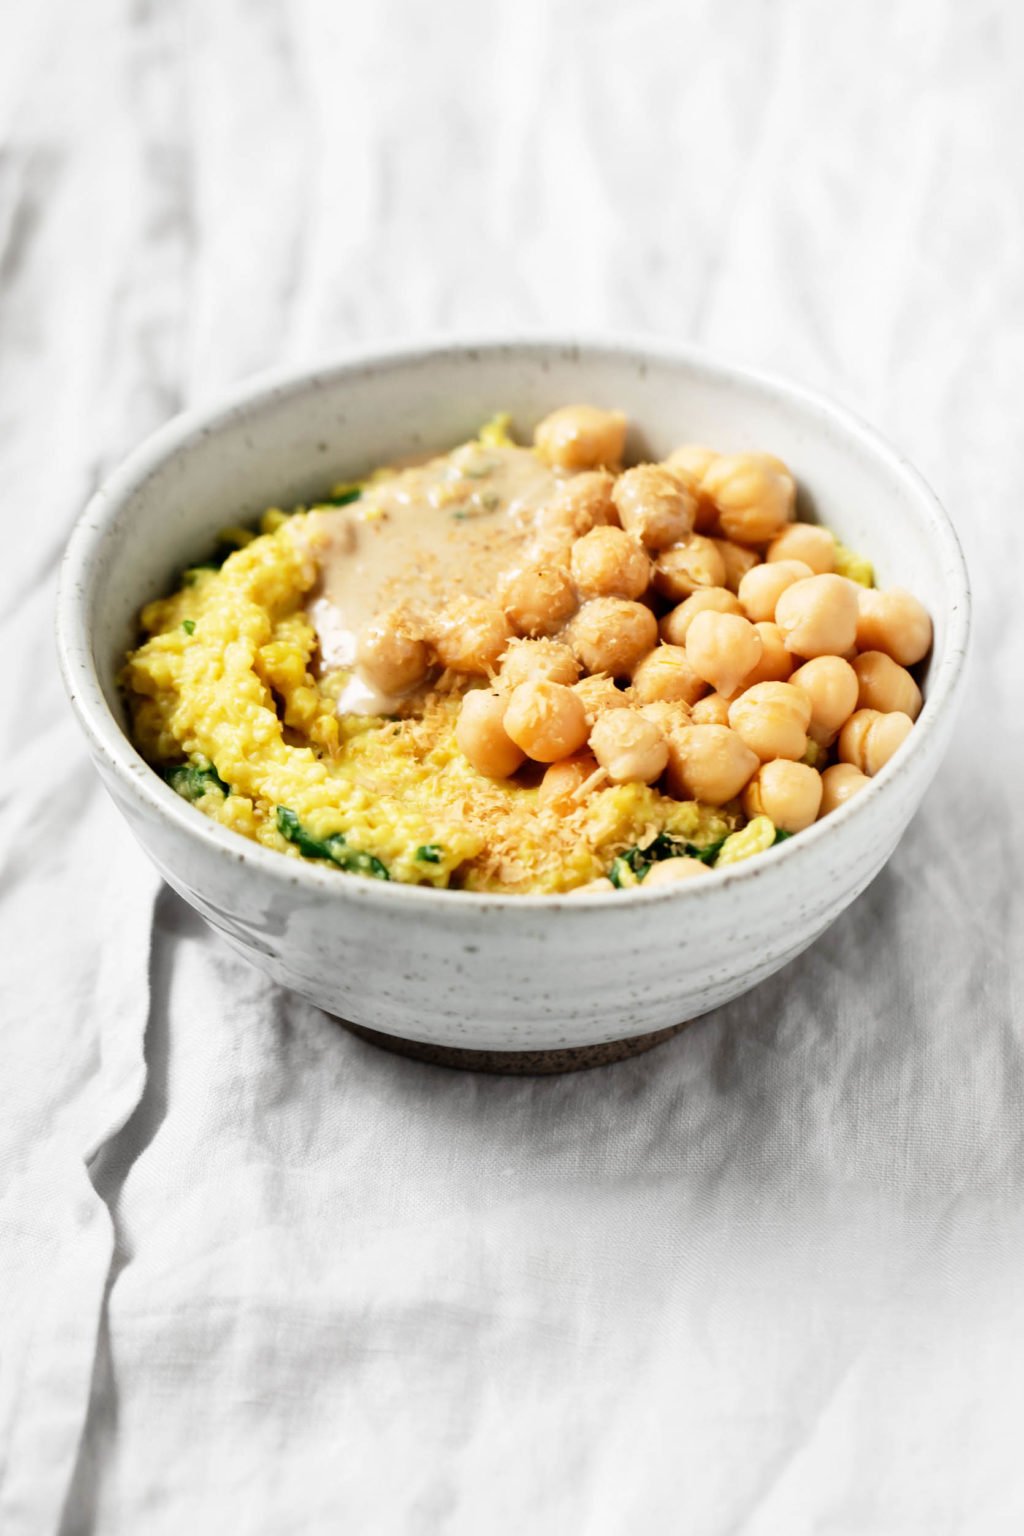 A gray and white ceramic bowl holds a dish of savory oatmeal made with chickpeas and spinach. It has been topped with a spoonful of tahini.